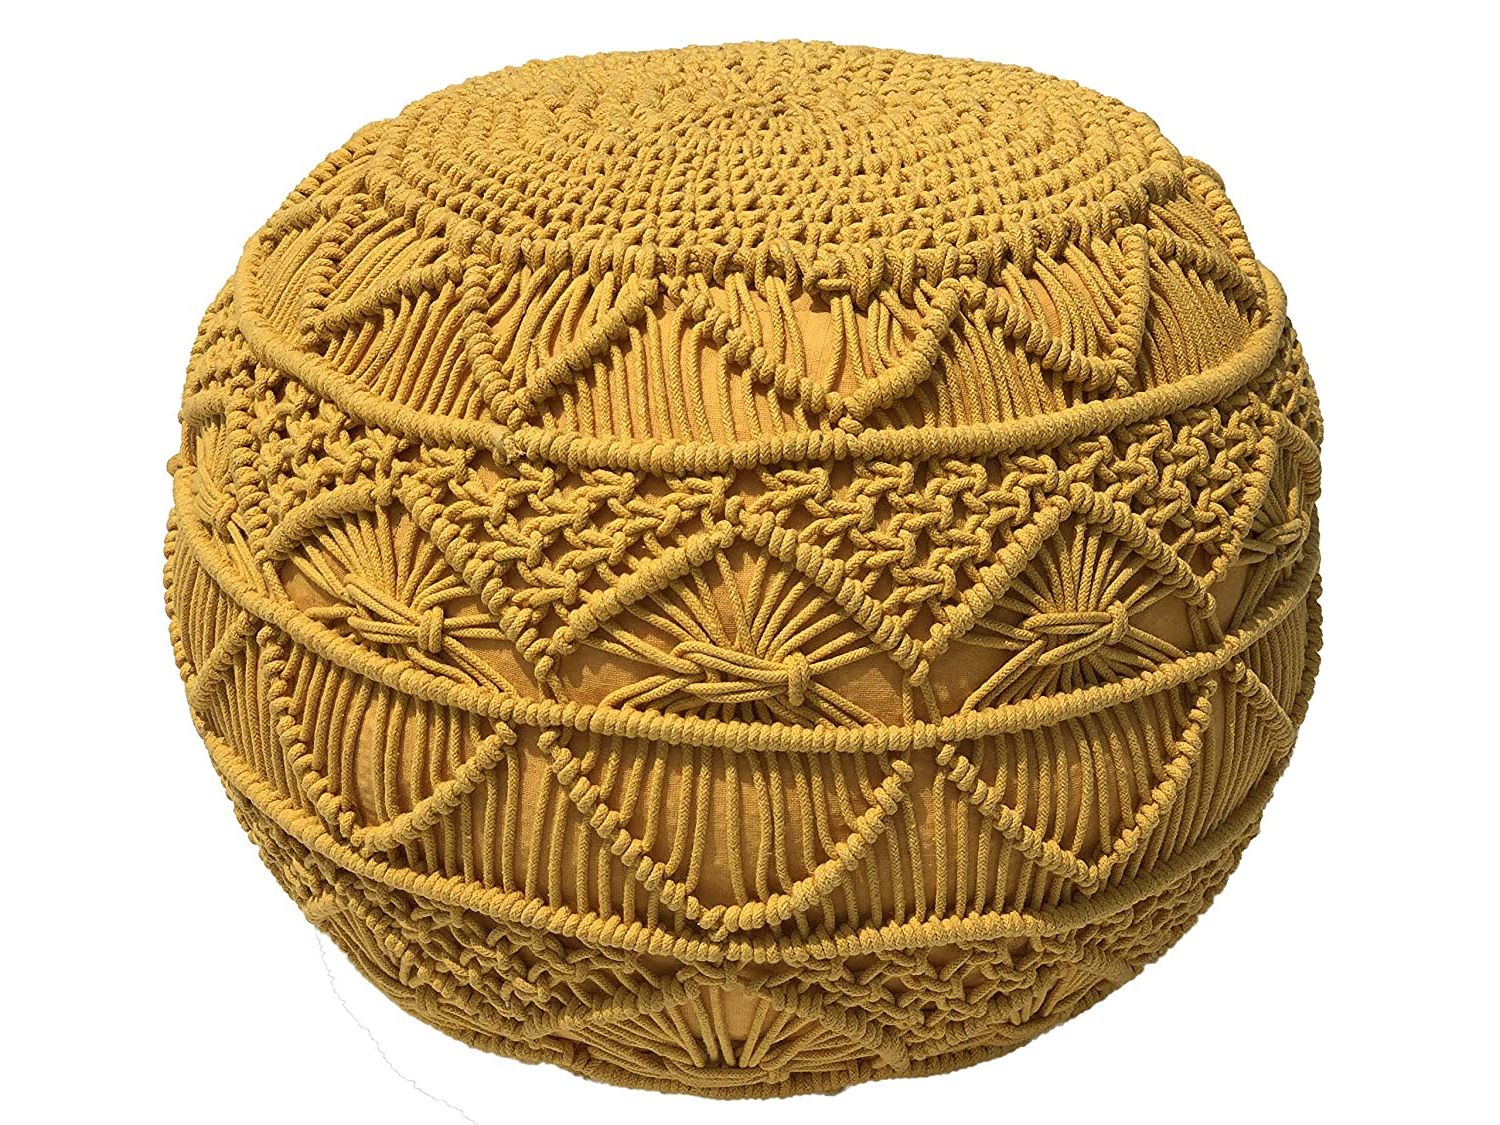 2018 Textured Green Round Pouf Ottomans With Hand Knitted Decorative Round Cotton Pouf Natural Braid Cord Textured (View 10 of 10)